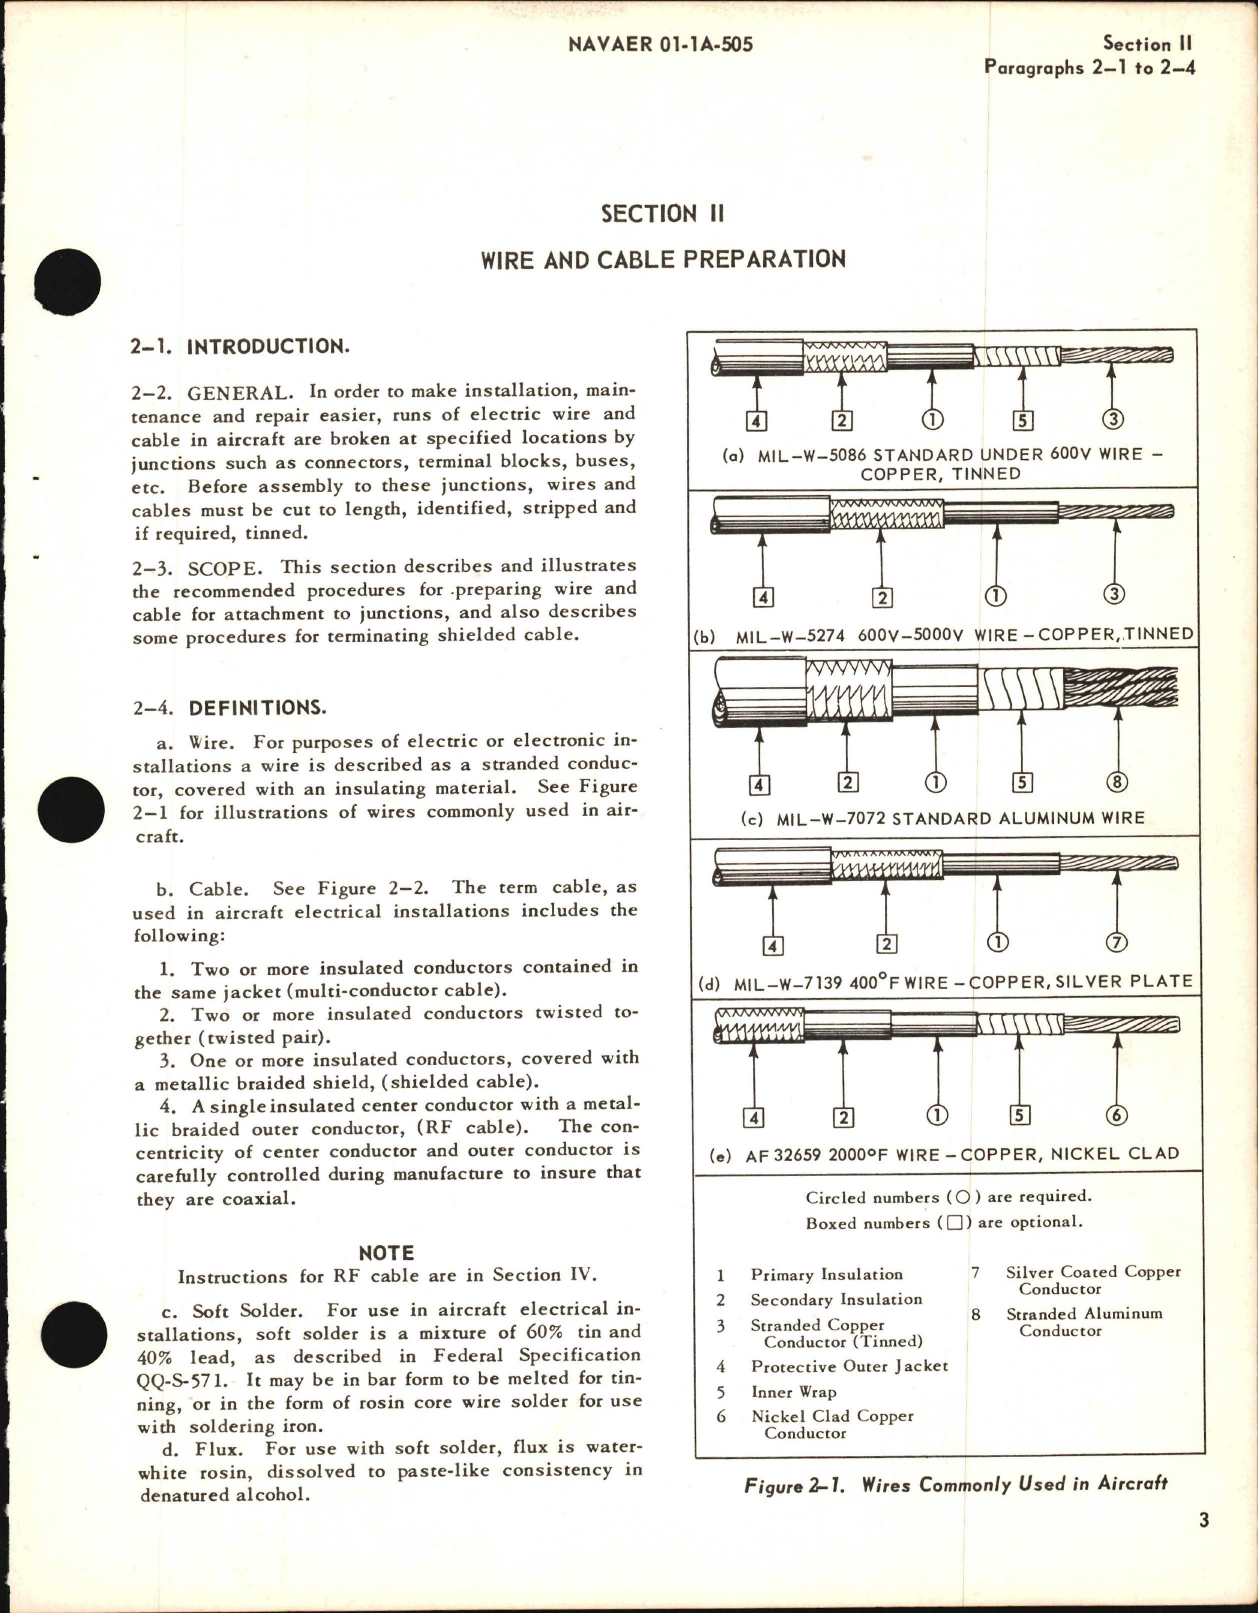 Sample page 7 from AirCorps Library document: Installation Practices for Aircraft Electric & Electronic Wiring